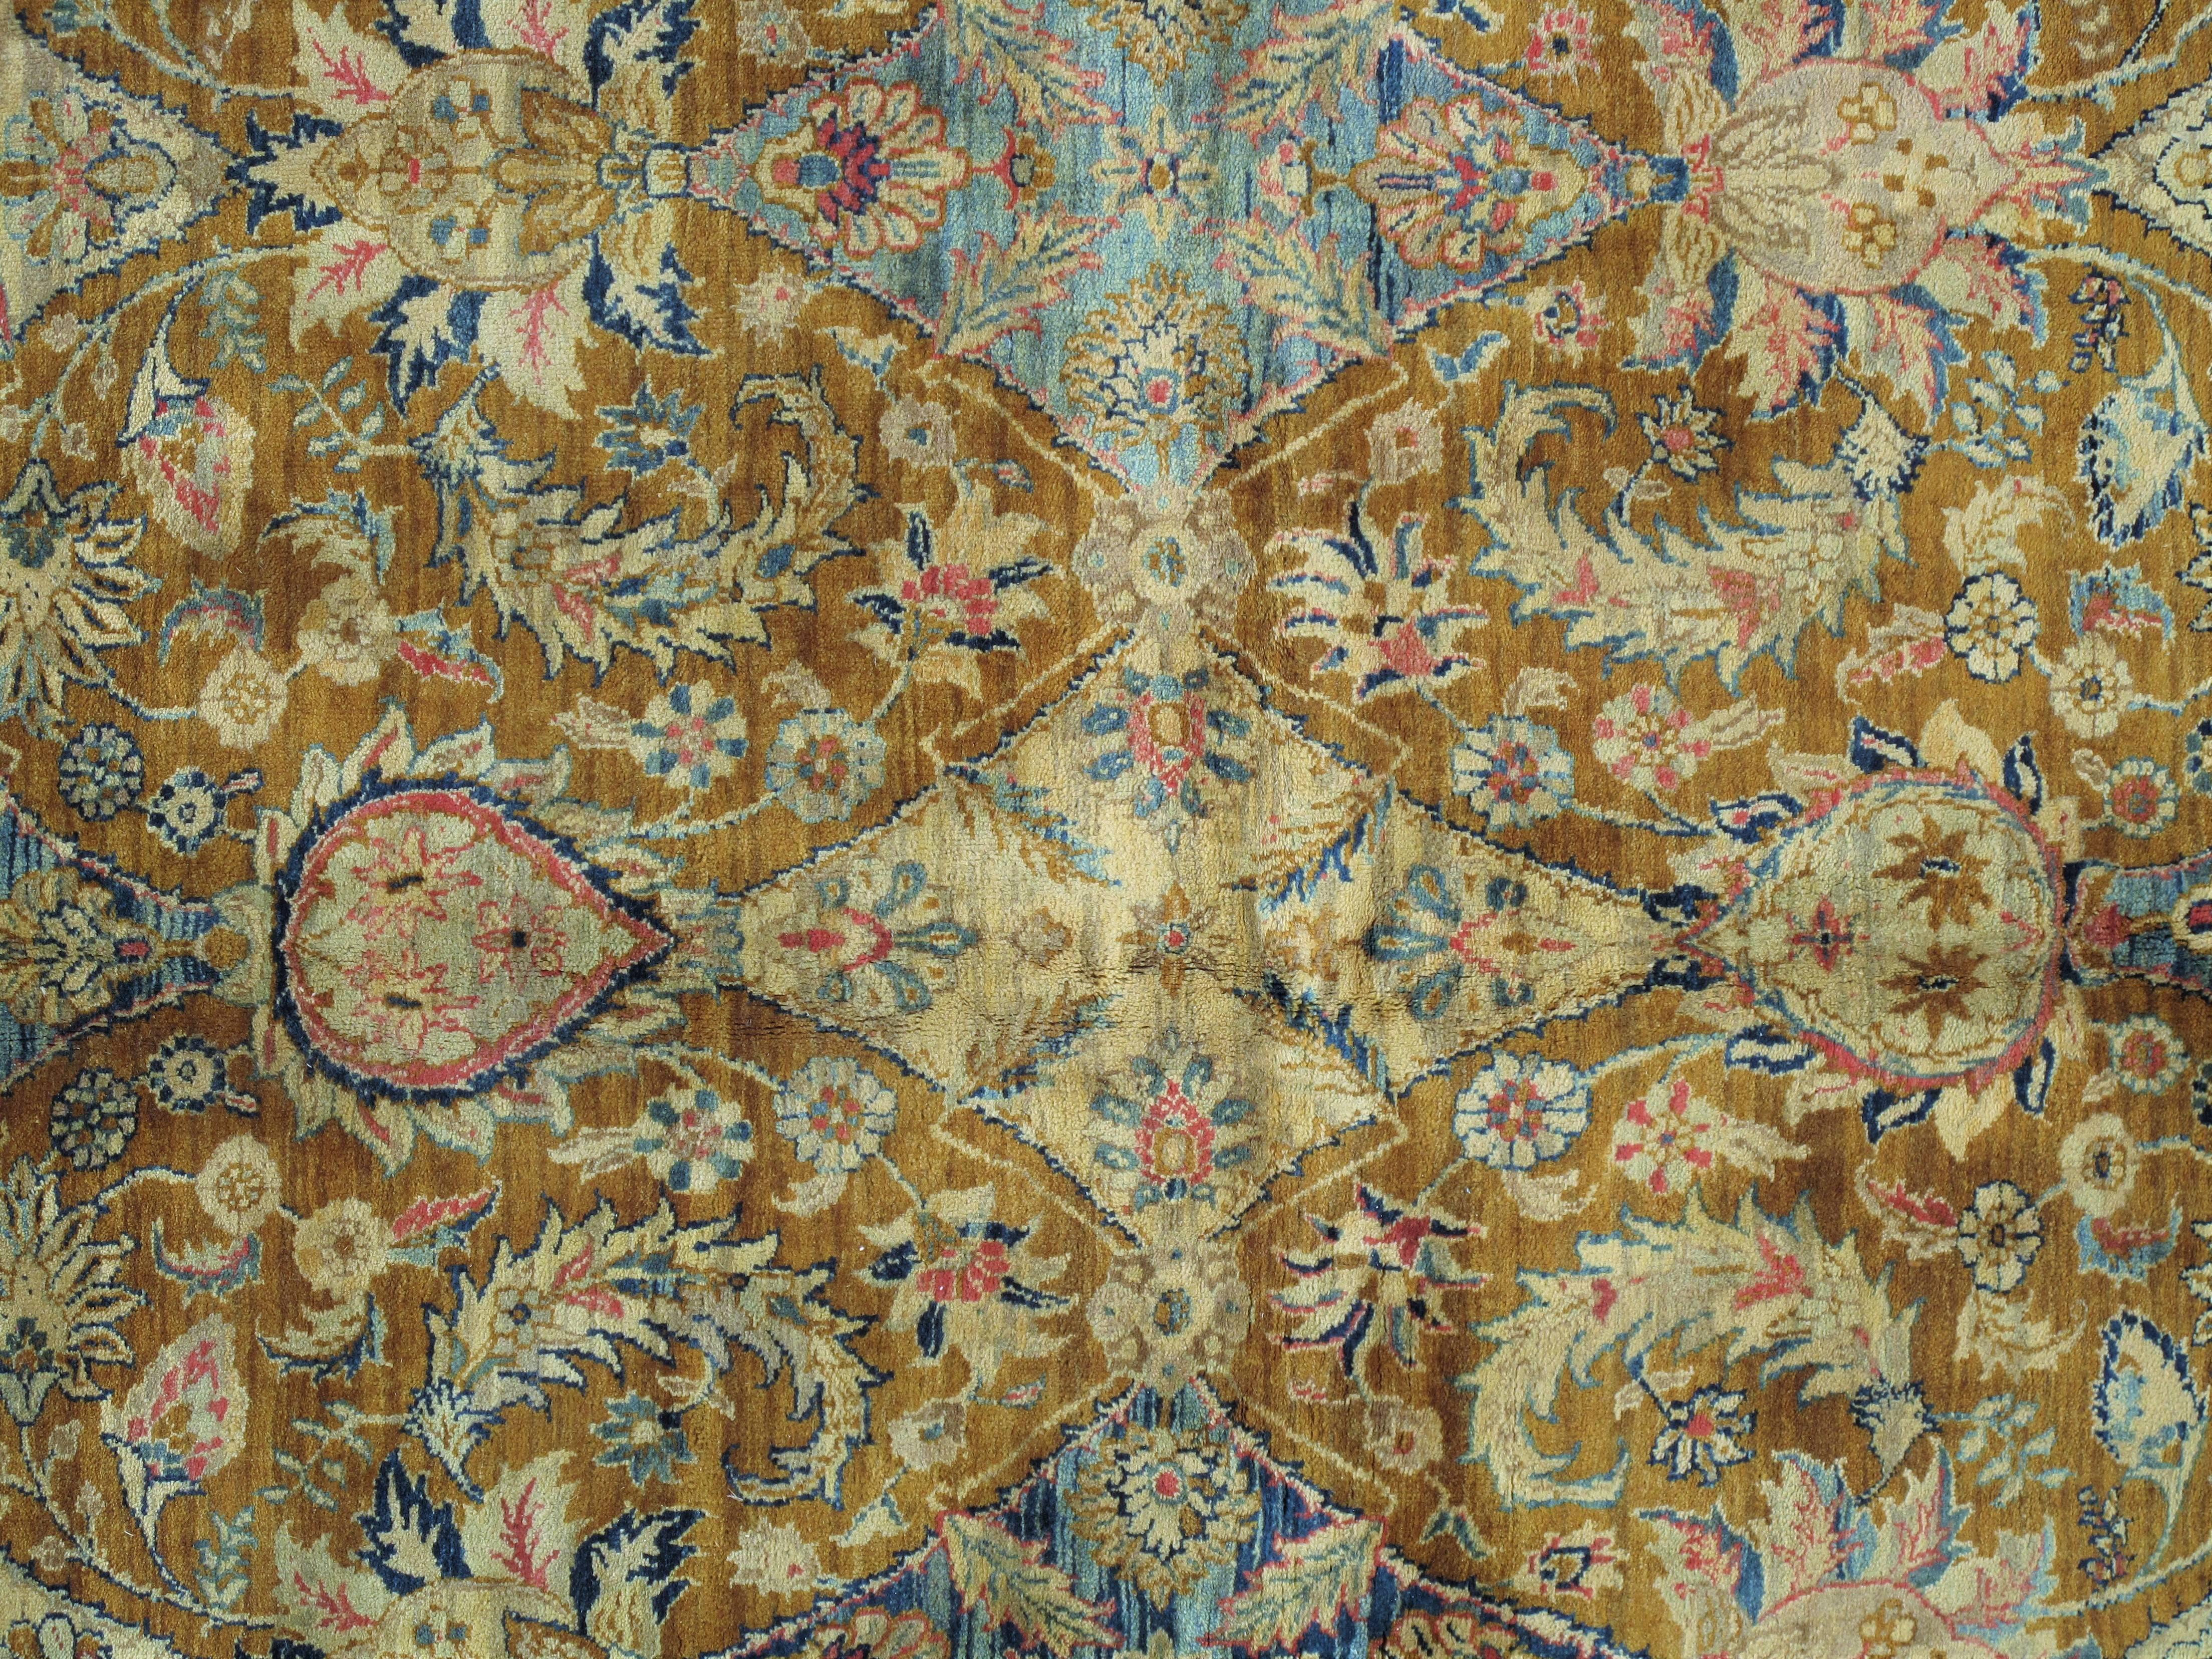 Tabriz carpets have always been among the most easily recognized and most beautiful fabrics of Persia, with curvilinear, graceful floral designs in a brilliant variety of colors. Consistently, from the 1870s through the 1930s, Tabriz carpets